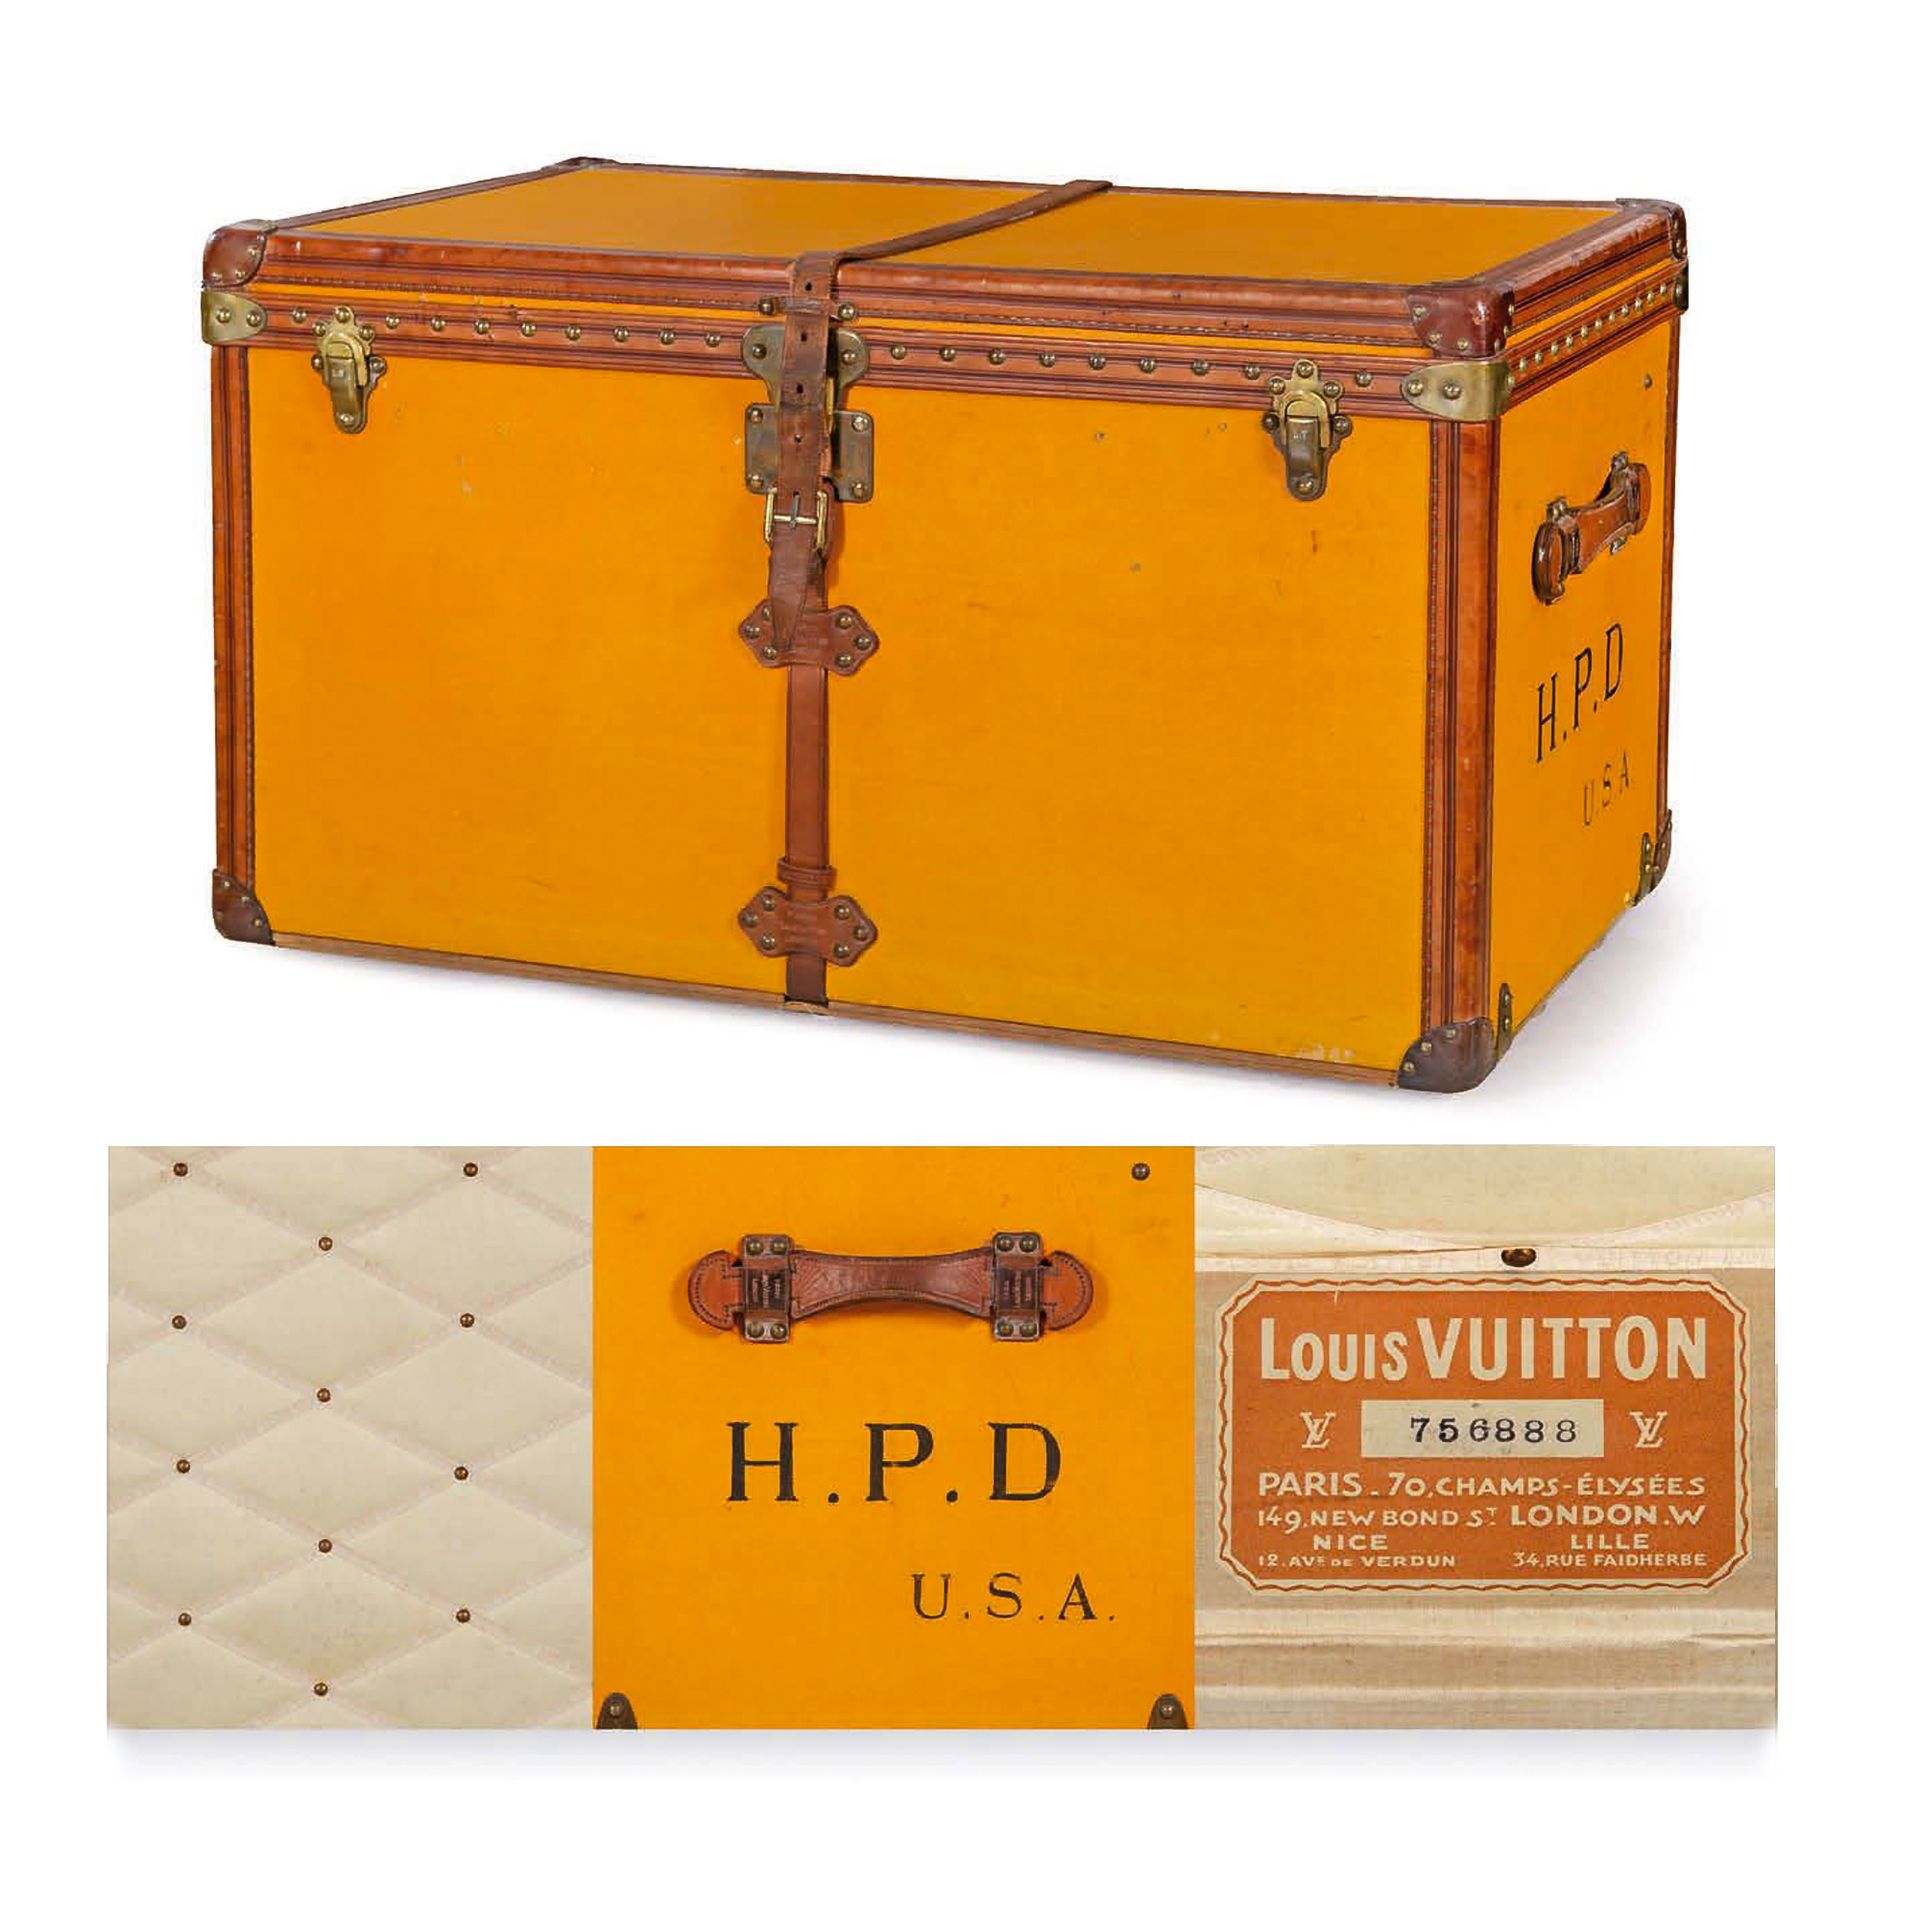 LOUIS VUITTON Trunk upholstered in orange leather, with leather fittings and cor&hellip;